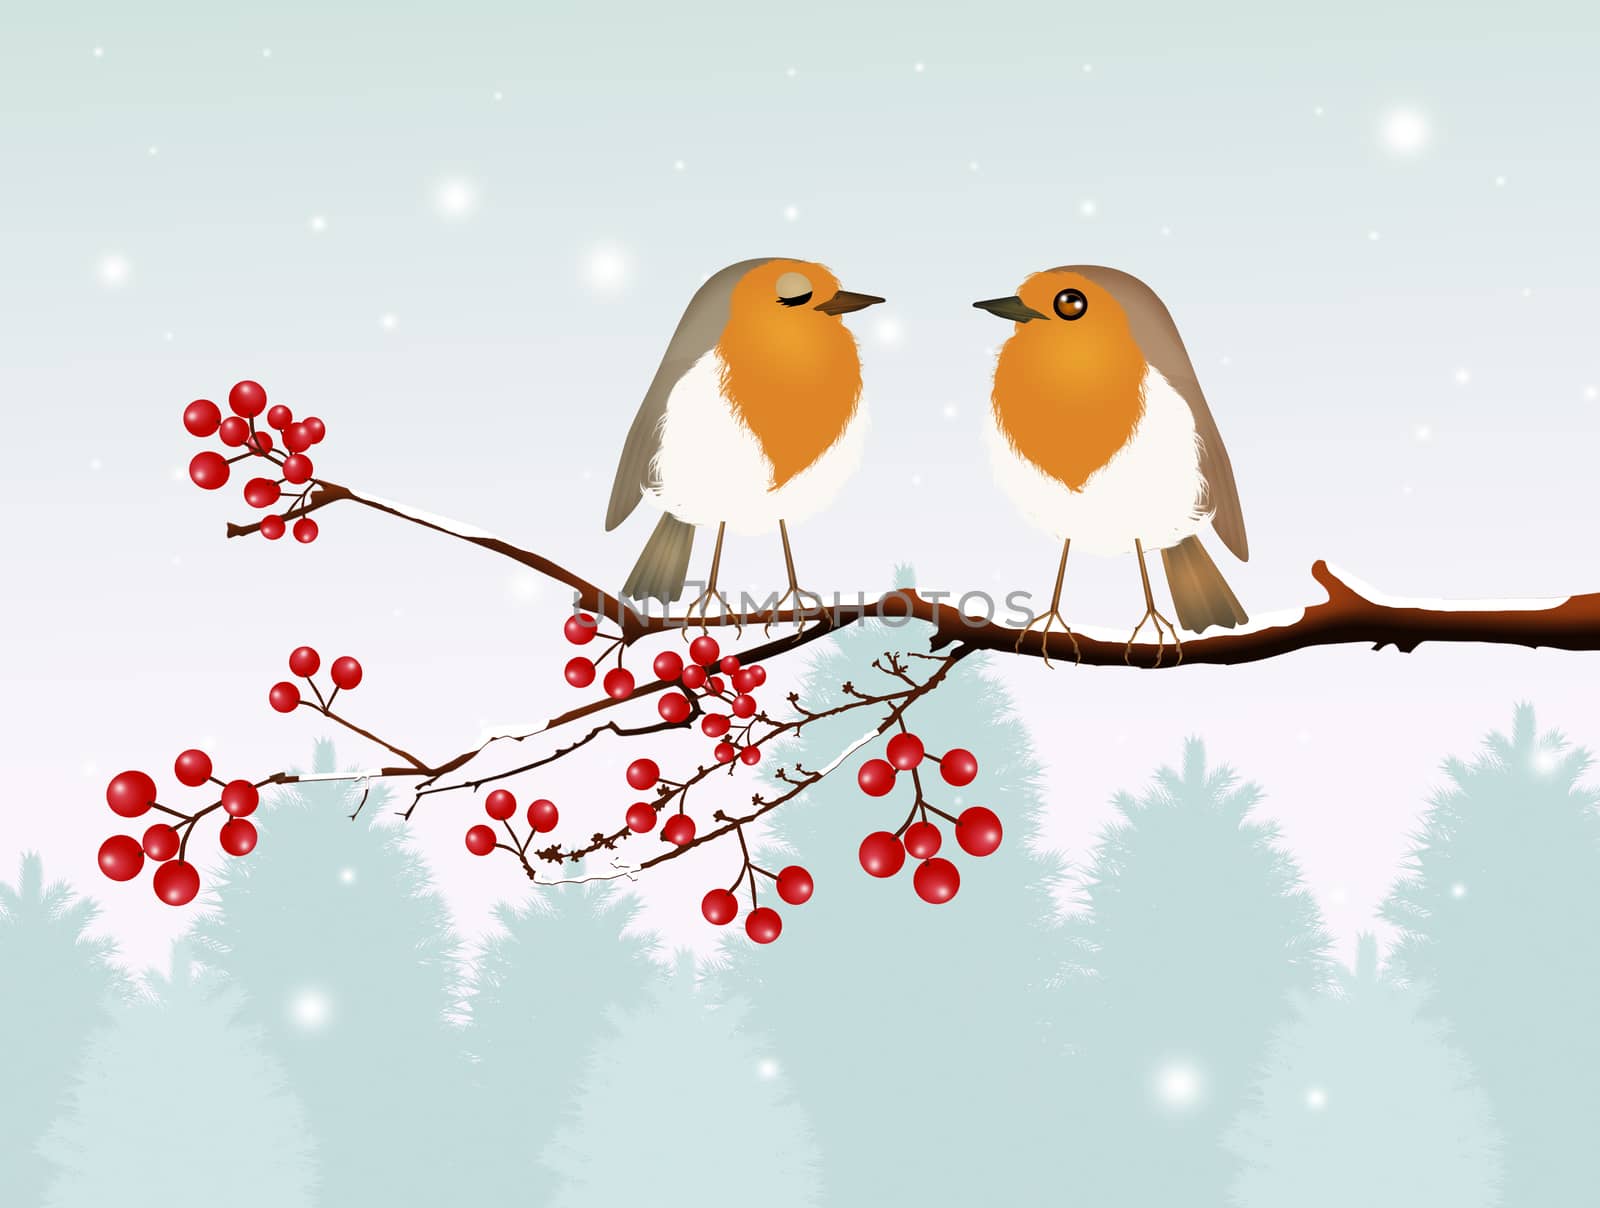 couple of robin birds in winter scenery by adrenalina